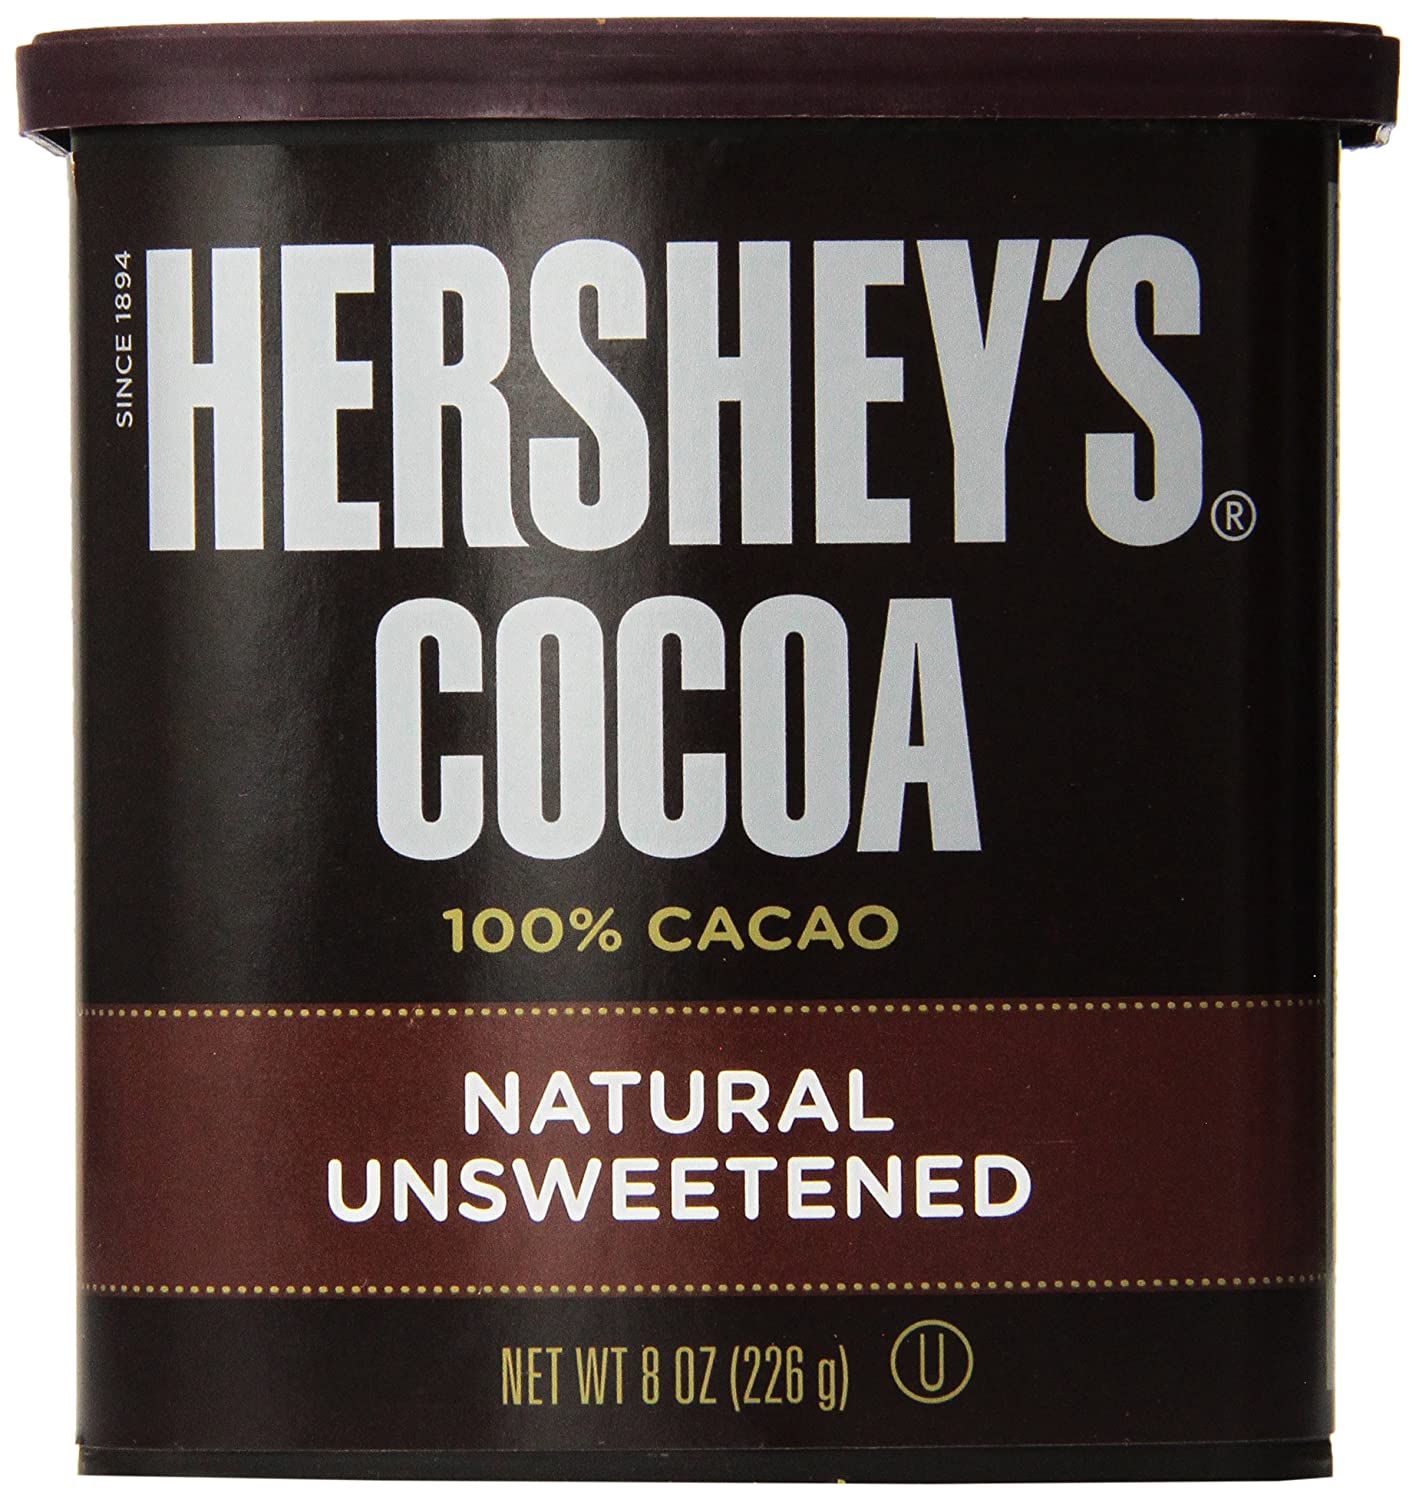 HERSHEY'S NATURAL UNSWEETENED COCOA 8 OZ